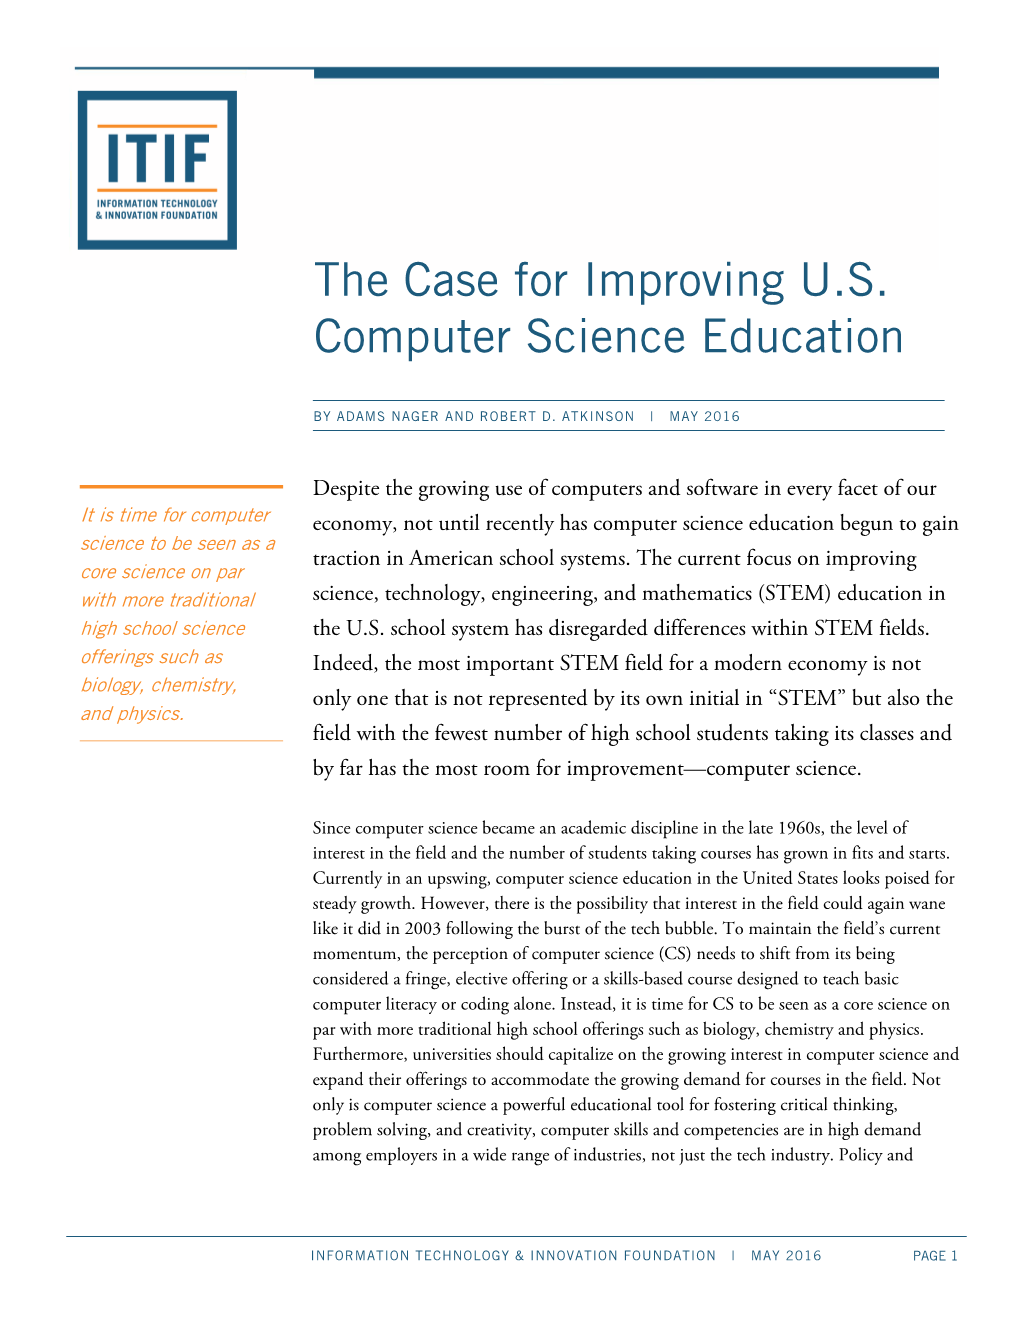 The Case for Improving U.S. Computer Science Education